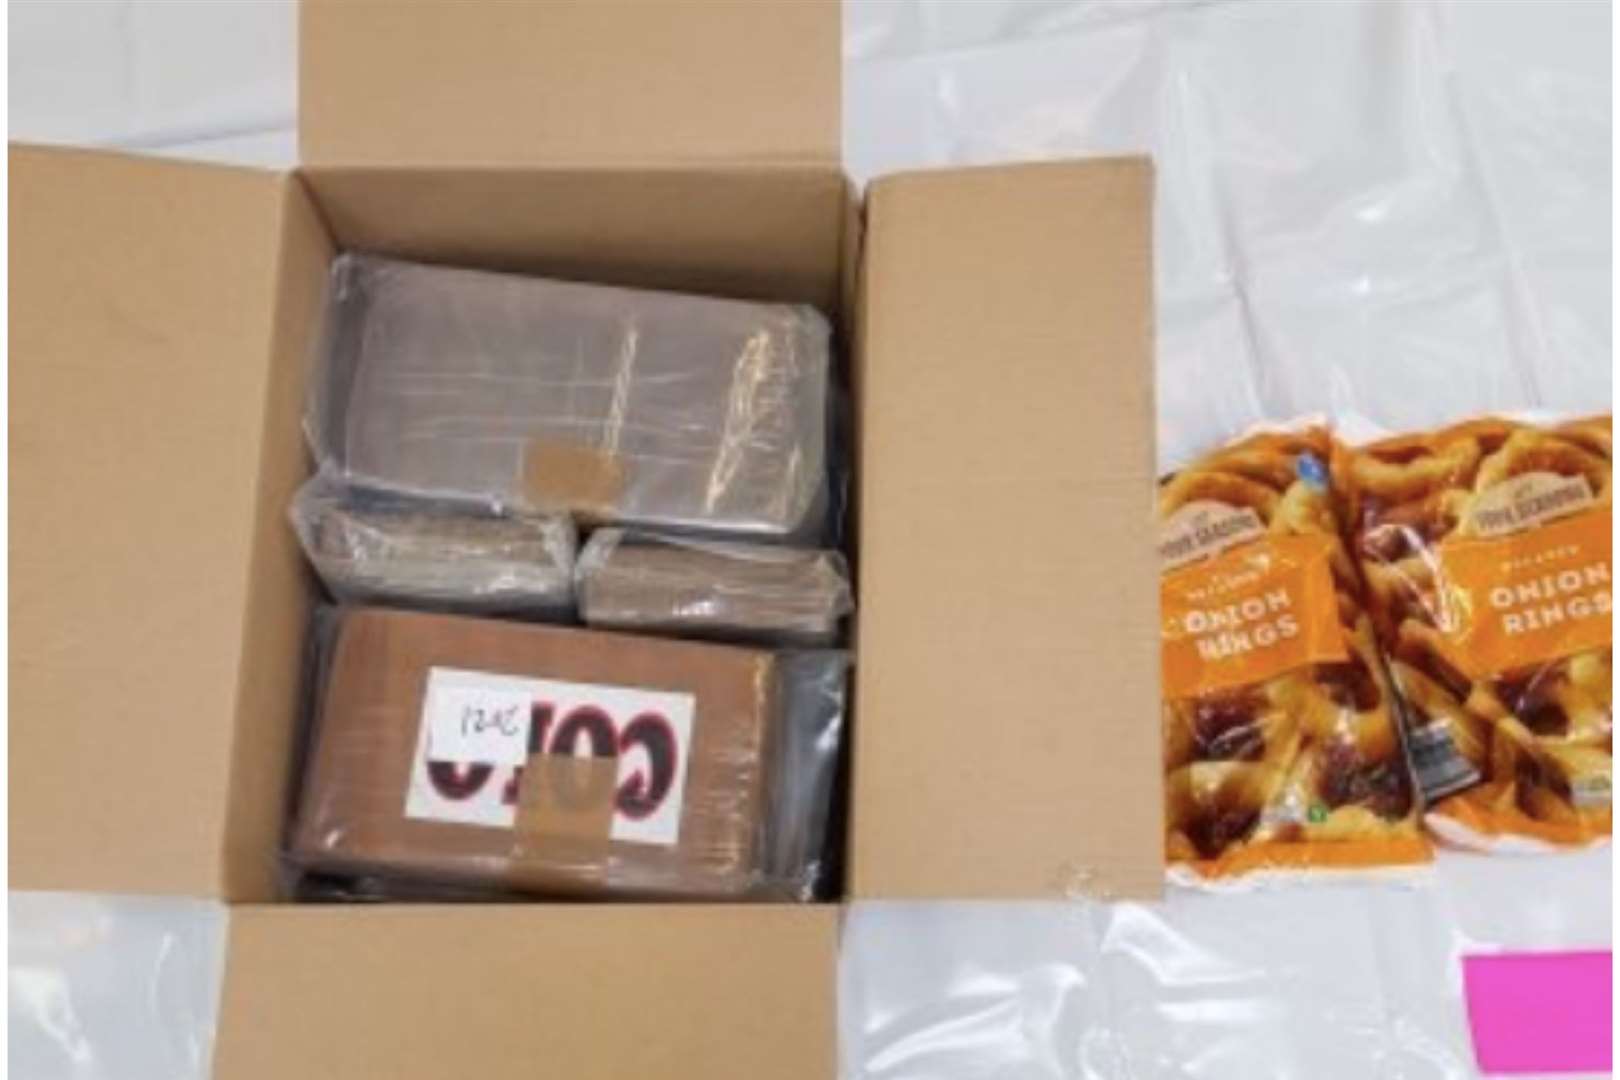 The drugs were found in a box pretending to be used for onion rings (53050568)